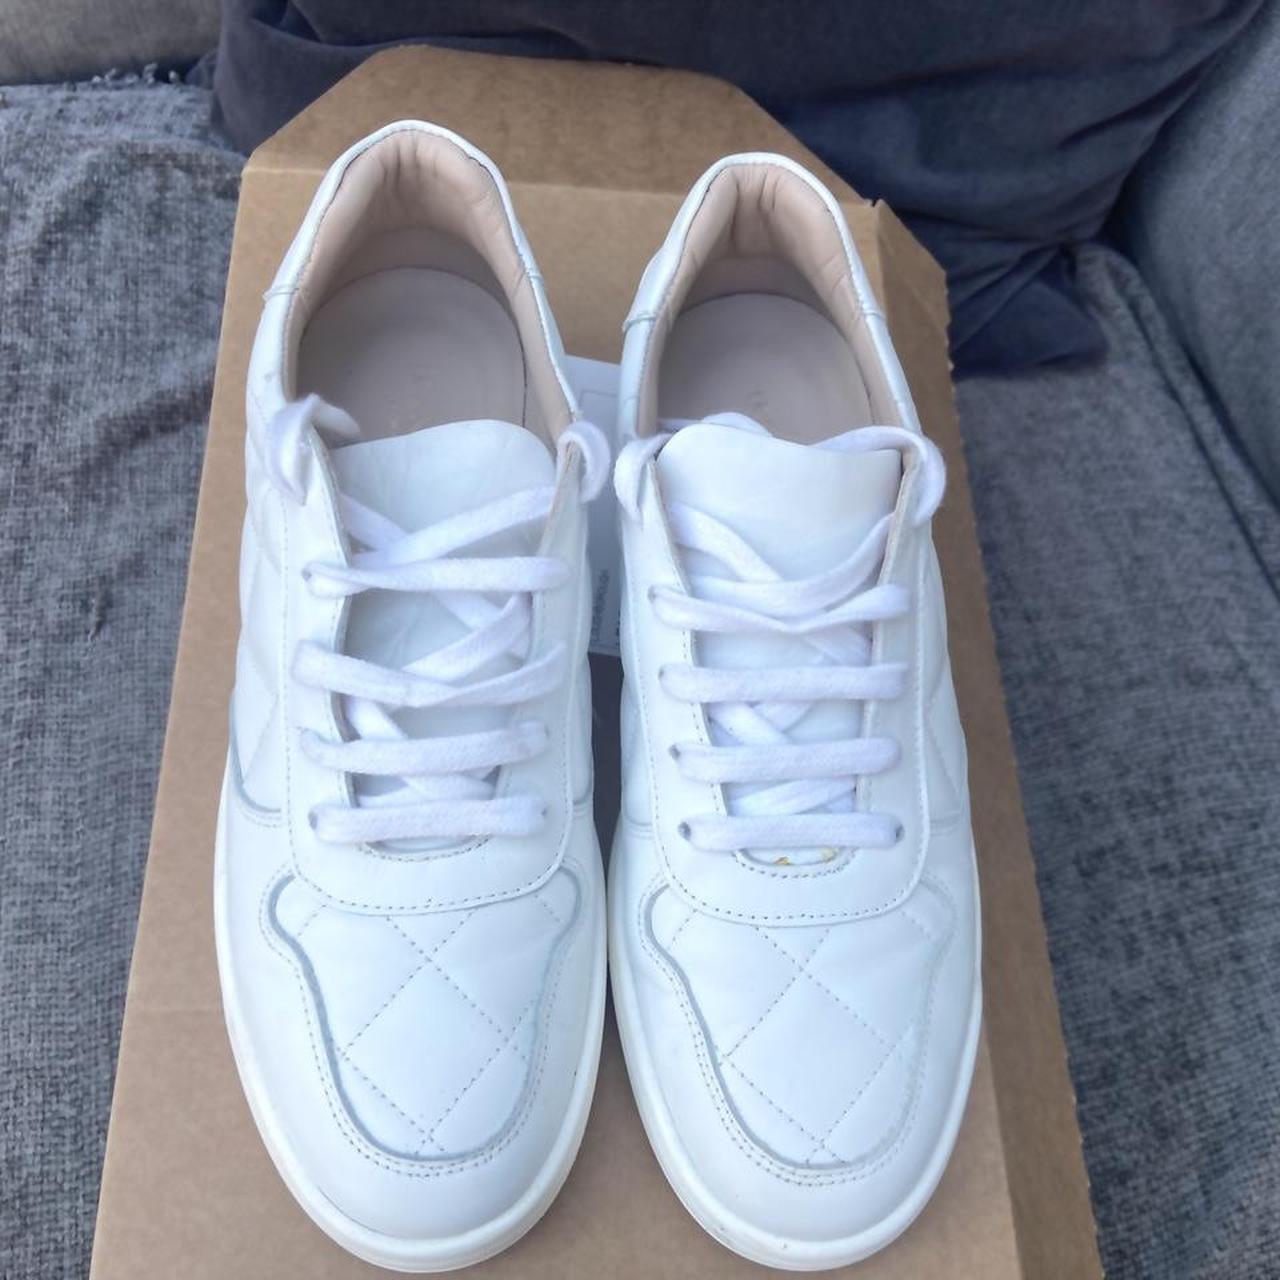 LK BENNET london - Campbell White leather quilted... - Depop